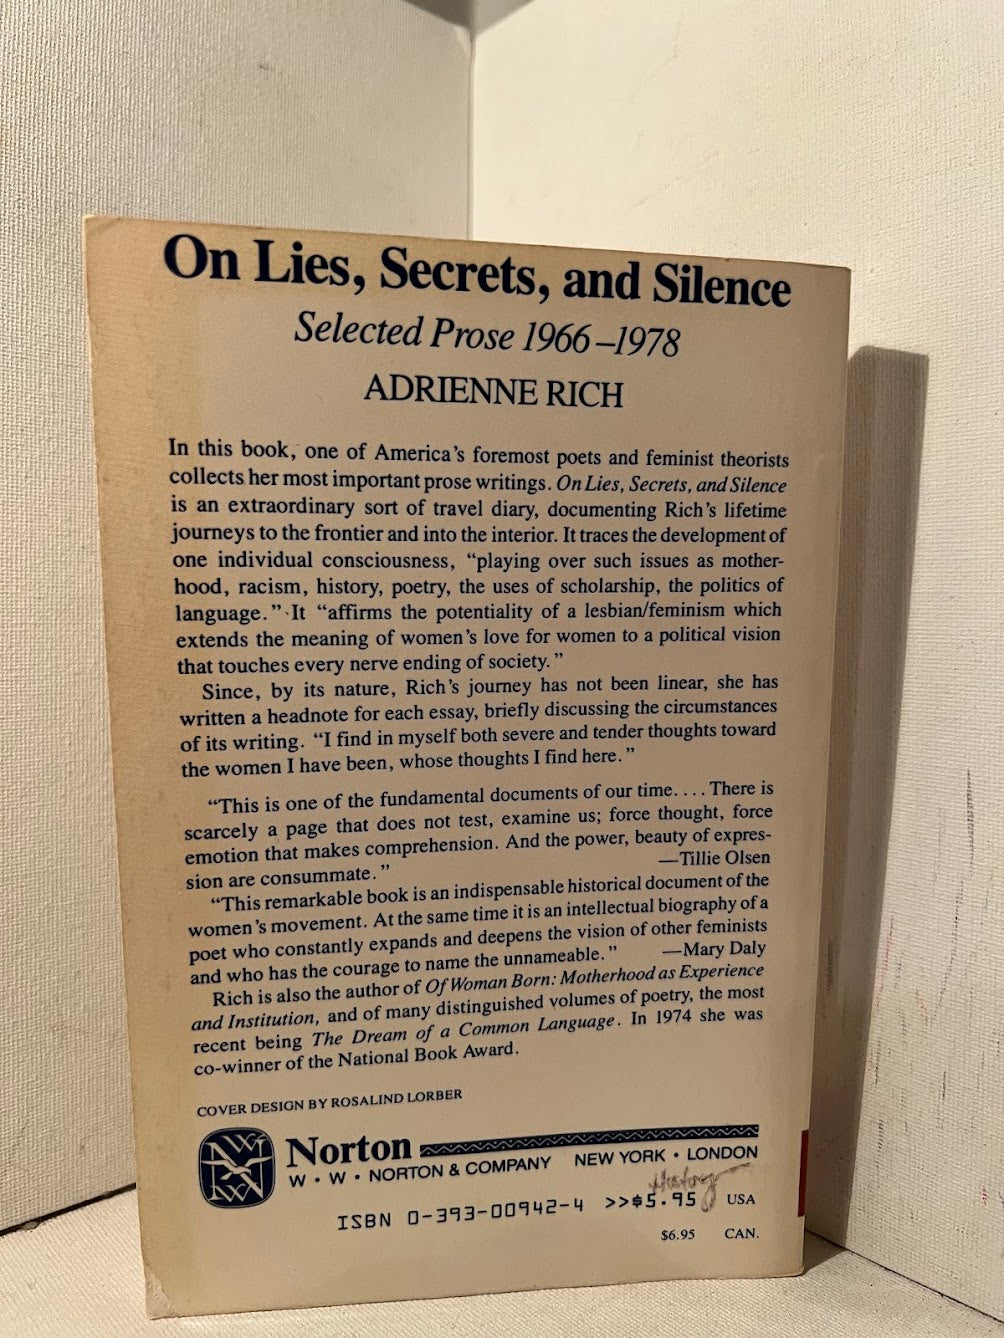 On Lies, Secrets, and Silence by Adrienne Rich